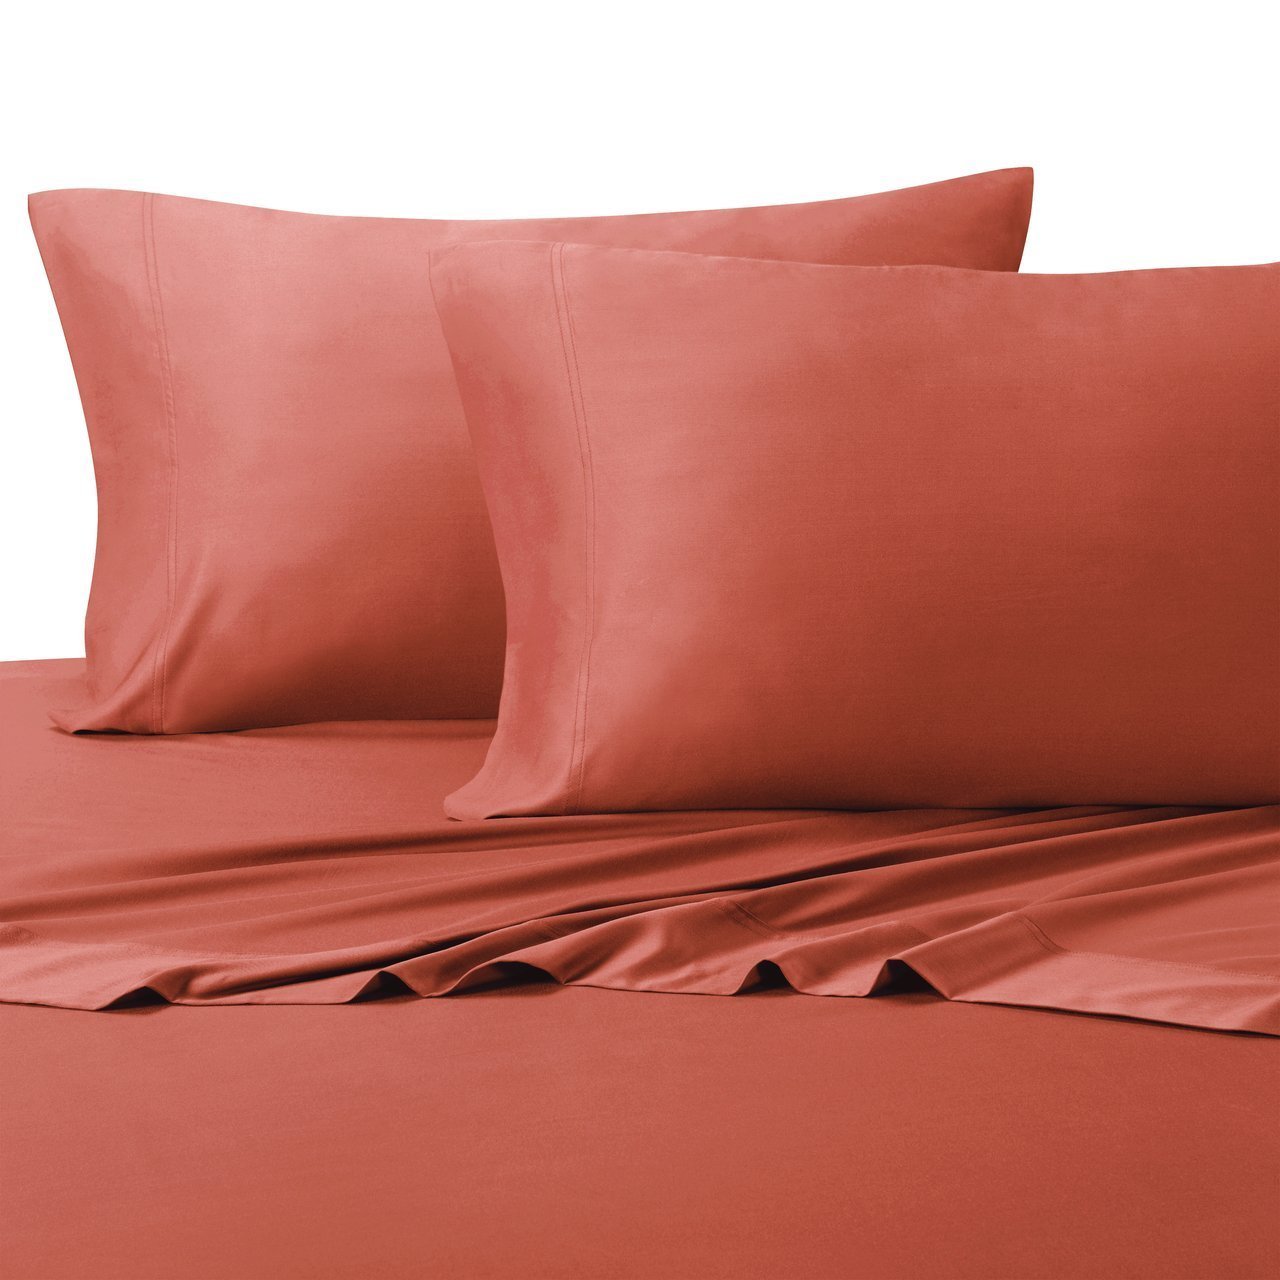 Ultra Soft & Exquisitely Silky 100% Viscose from Bamboo Sheet Set, Hypo-Allergenic, 18" Pockets, Coral, 4 Piece King Size Deep Pocket Sheet Set, $100